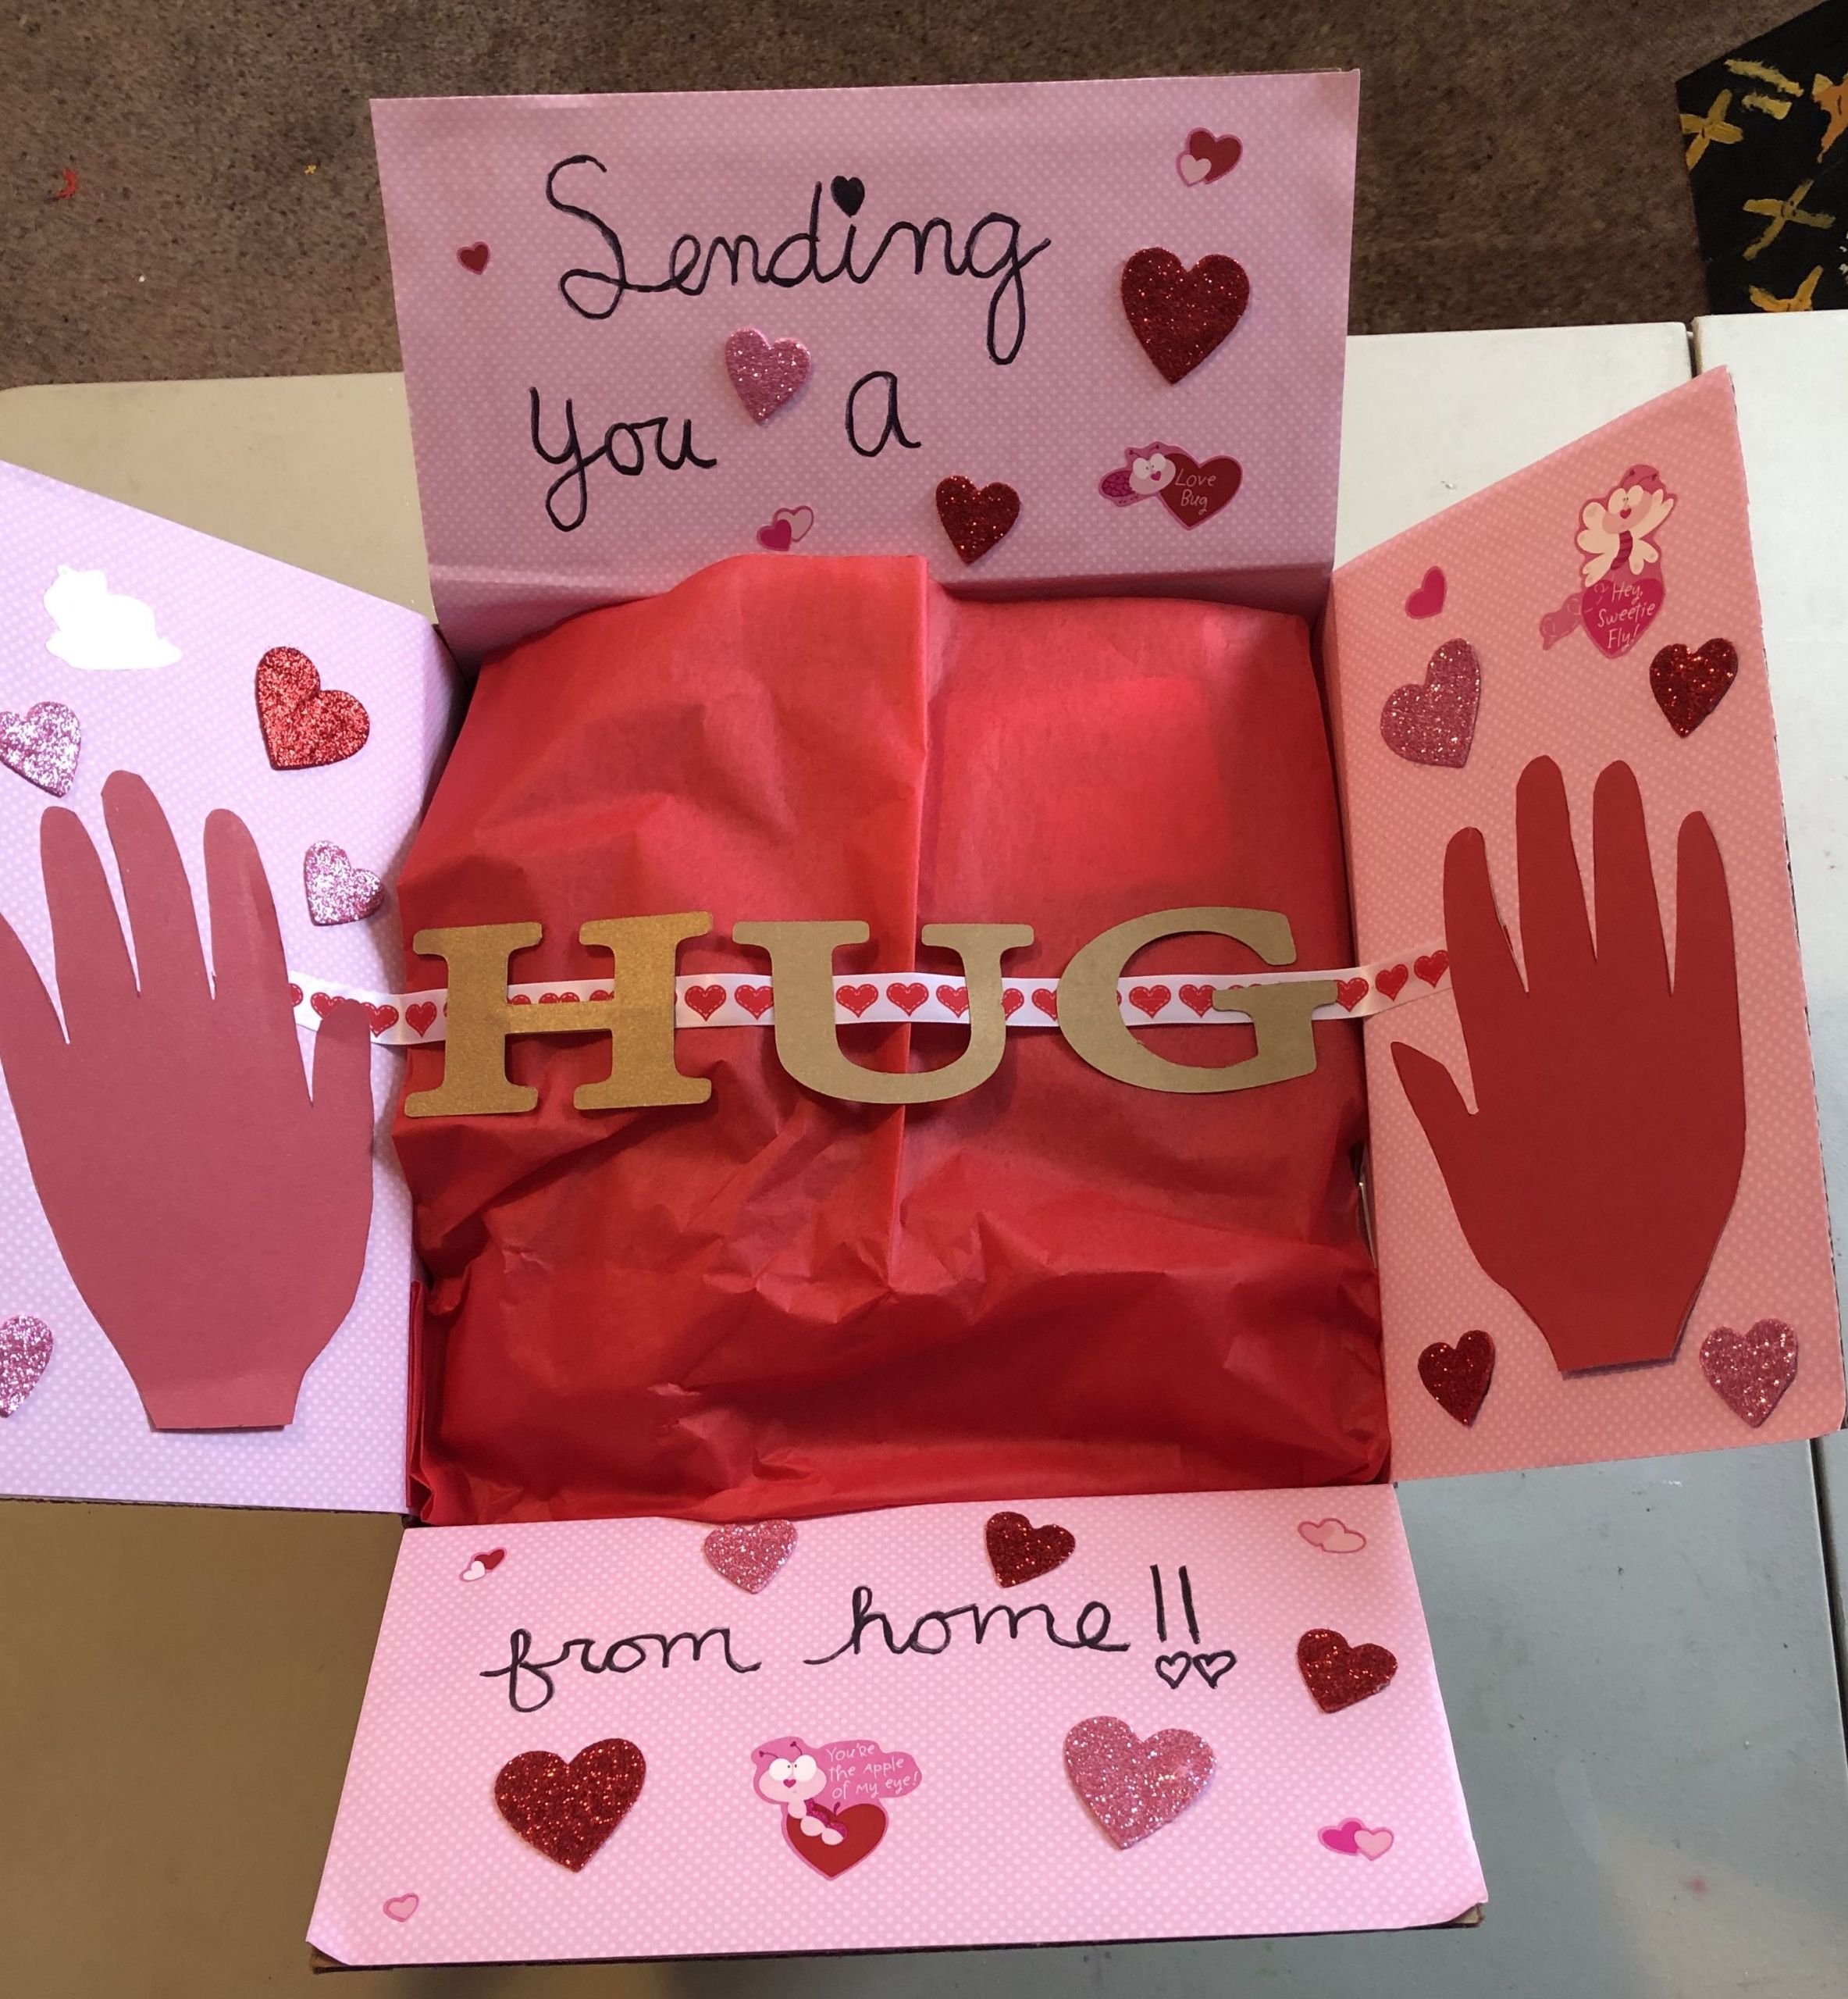 Valentines Day Care Package Ideas
 Sending you a hug from home care package